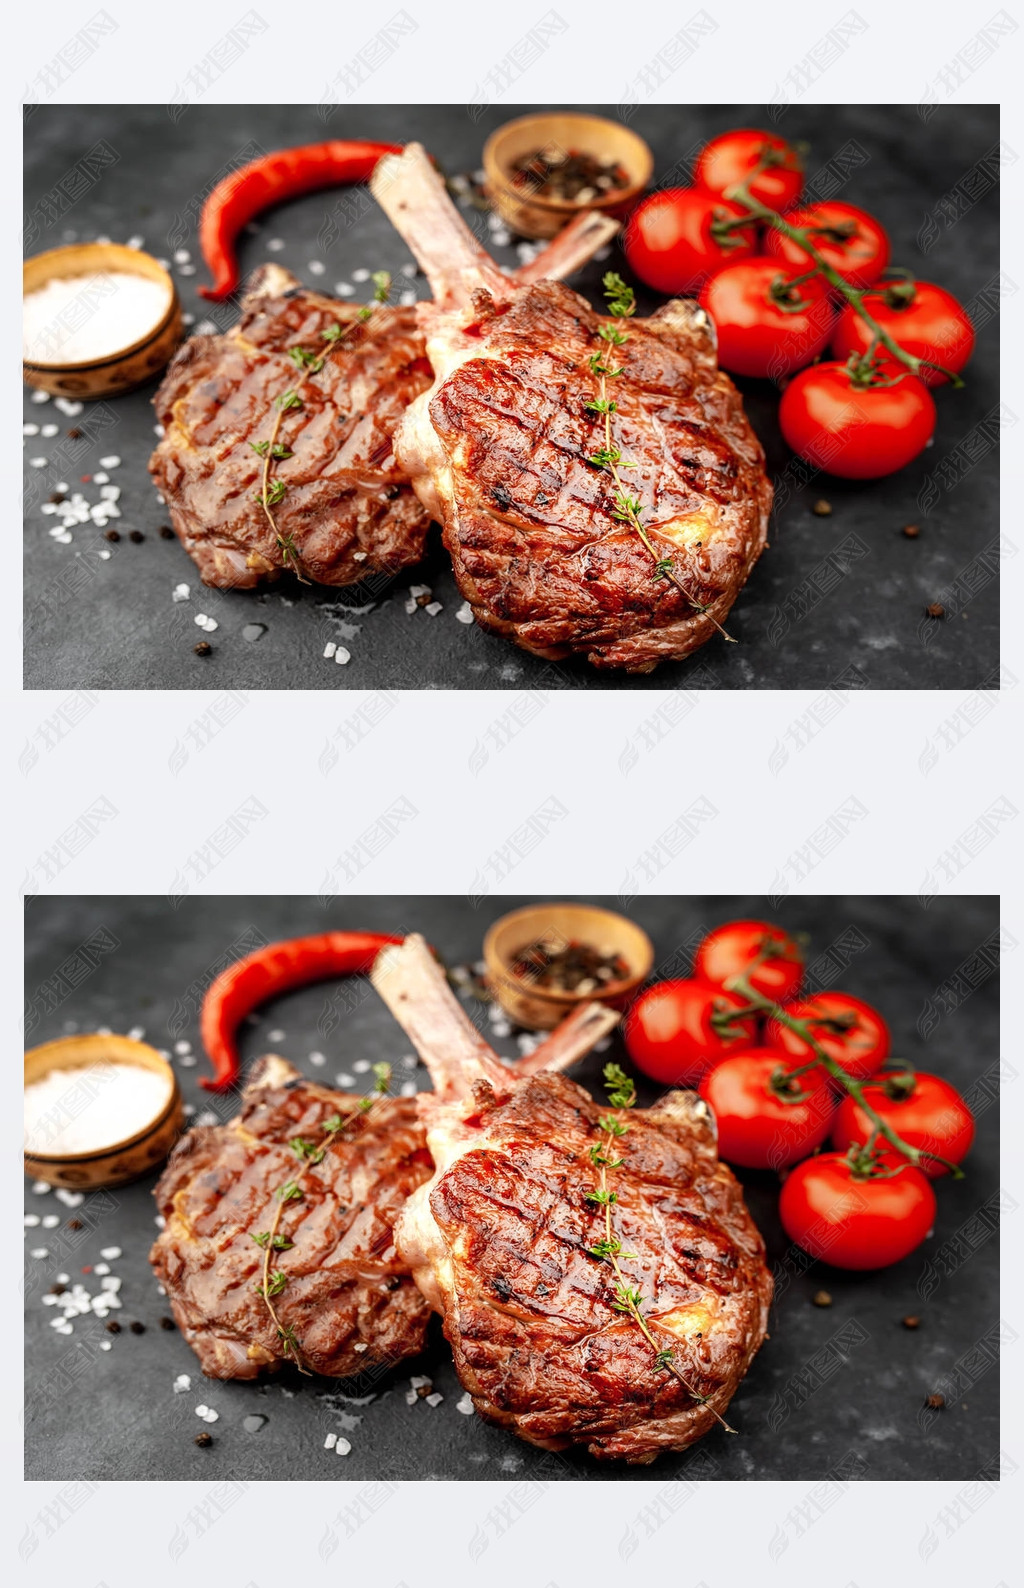 grilled beef steaks - tomahawk with tomatoes and red pepper on a stone background